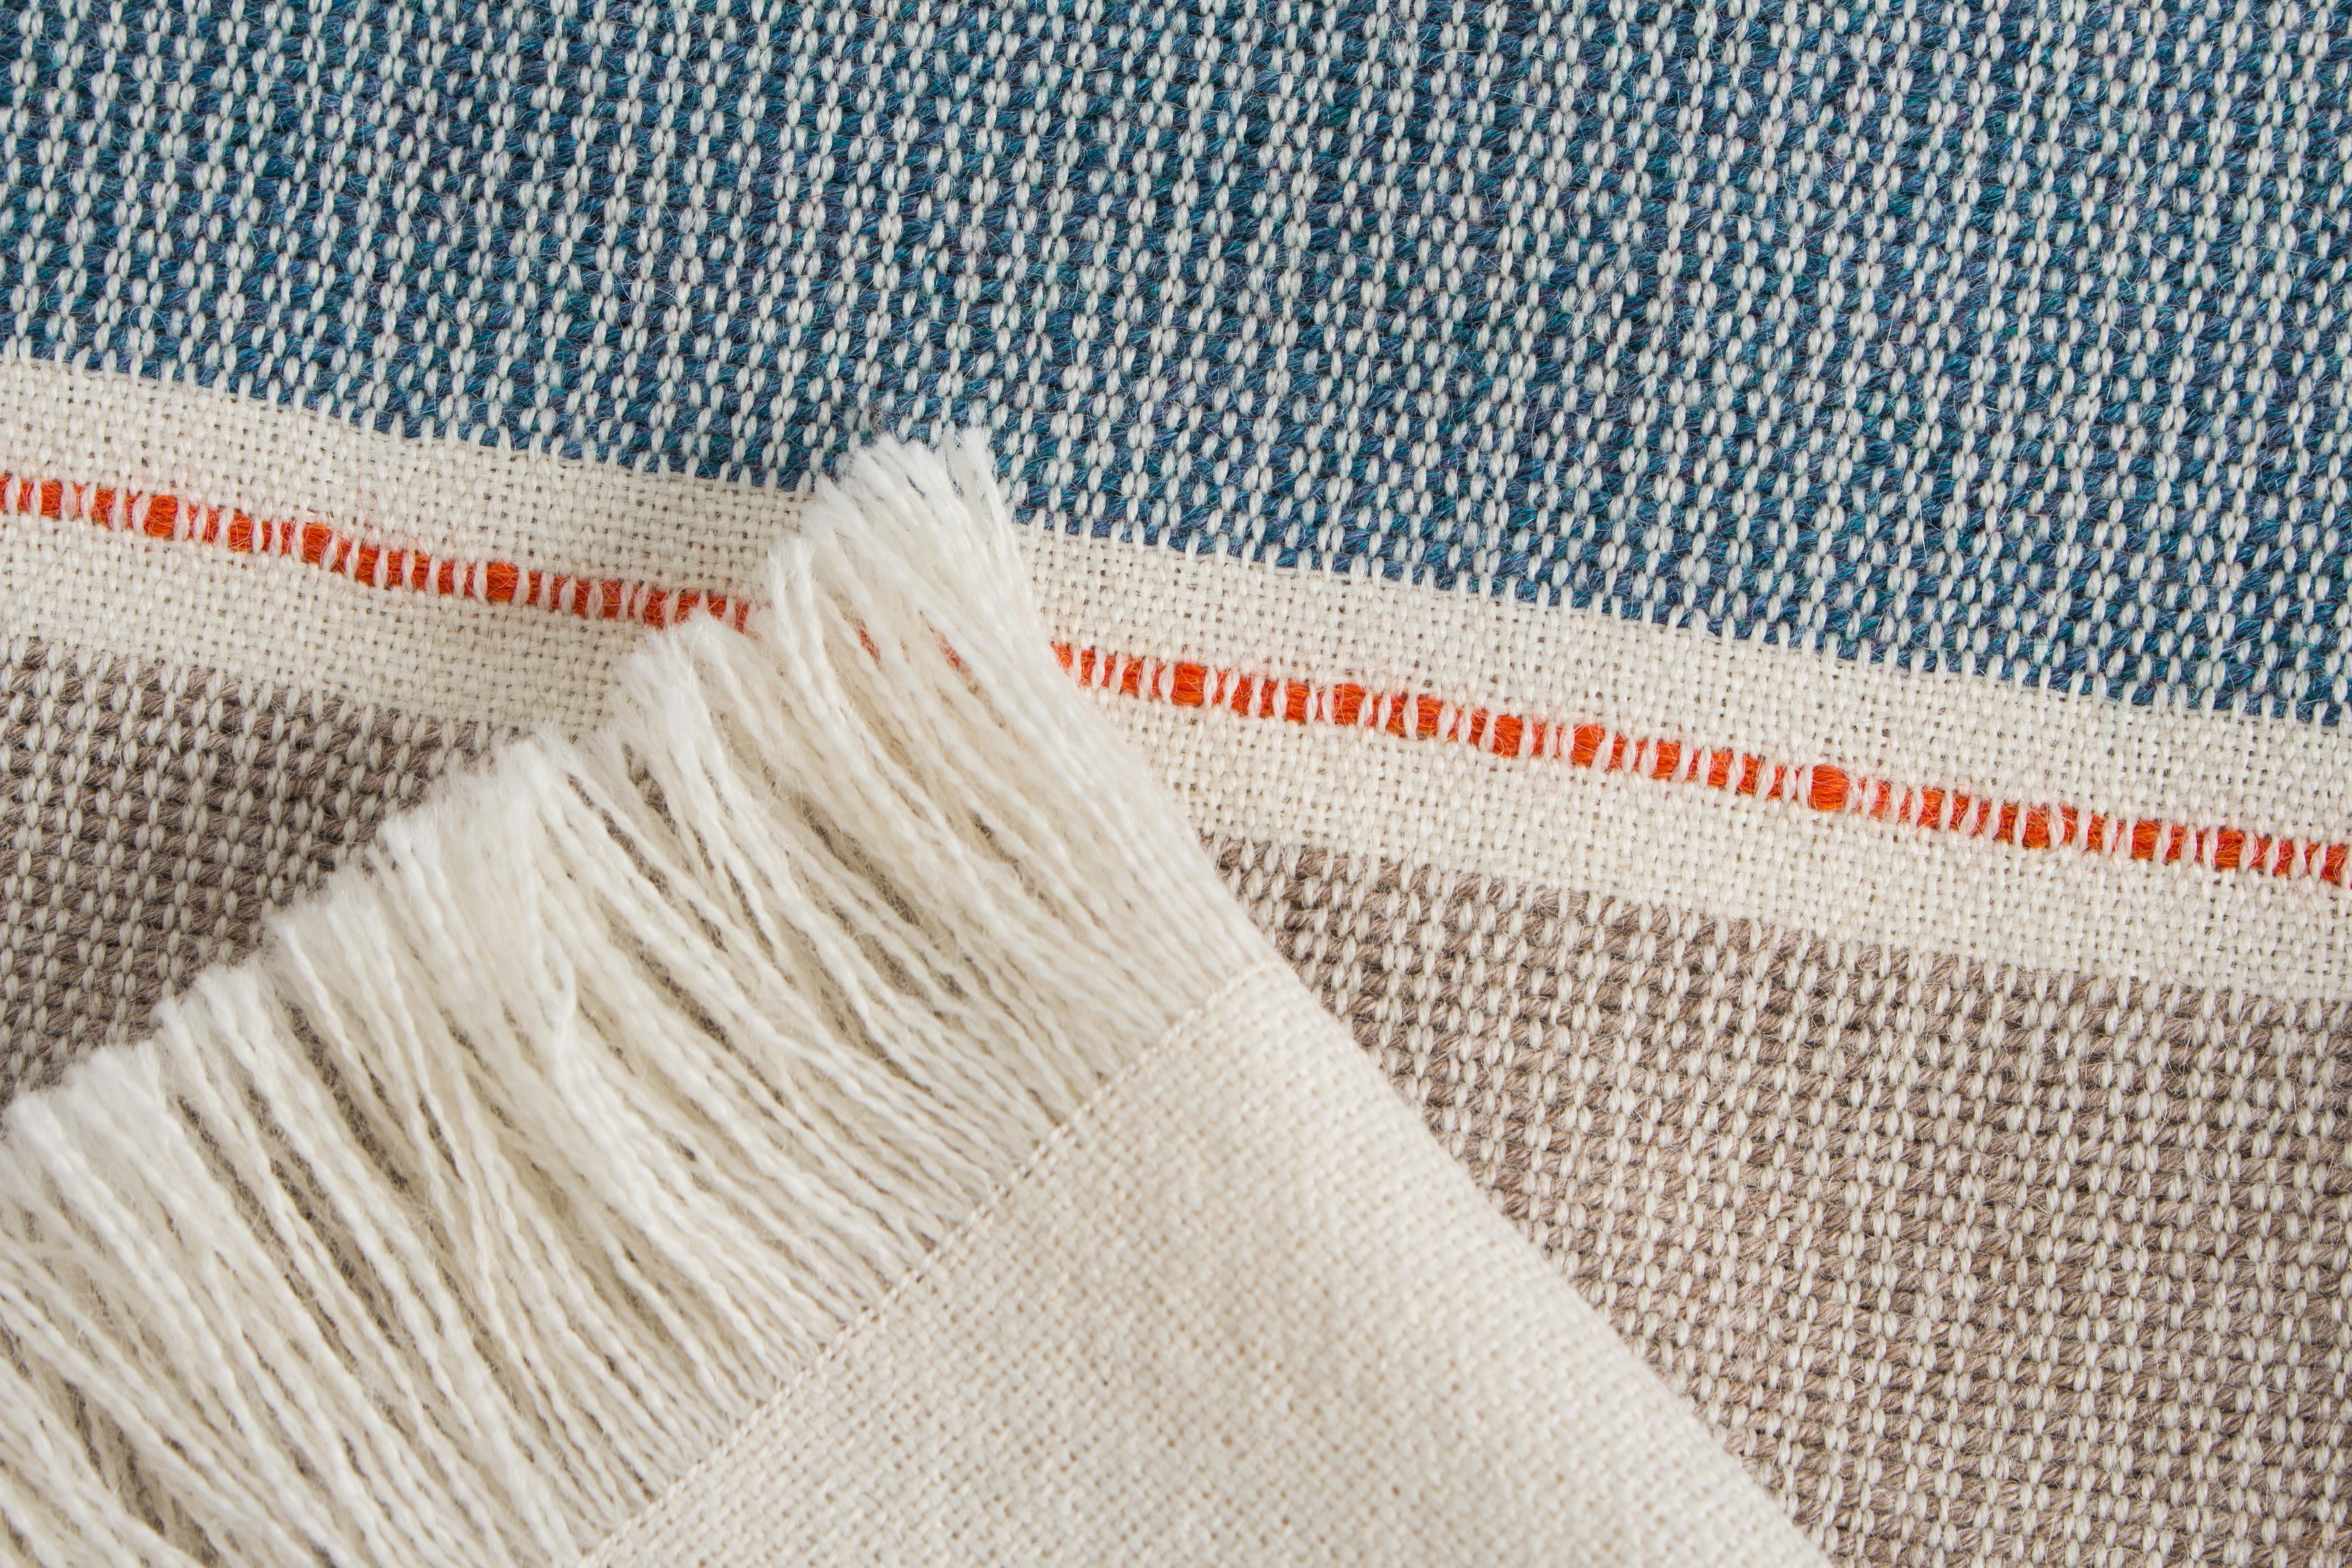 Studio Altar presents daily rituals in collaboration with Allpa, a Peruvian Fairtrade brand working with artisans for 35 years. Handwoven in the Andes of Peru, the throws are made of the softest Alpaca wool and represent the contrast of earth and